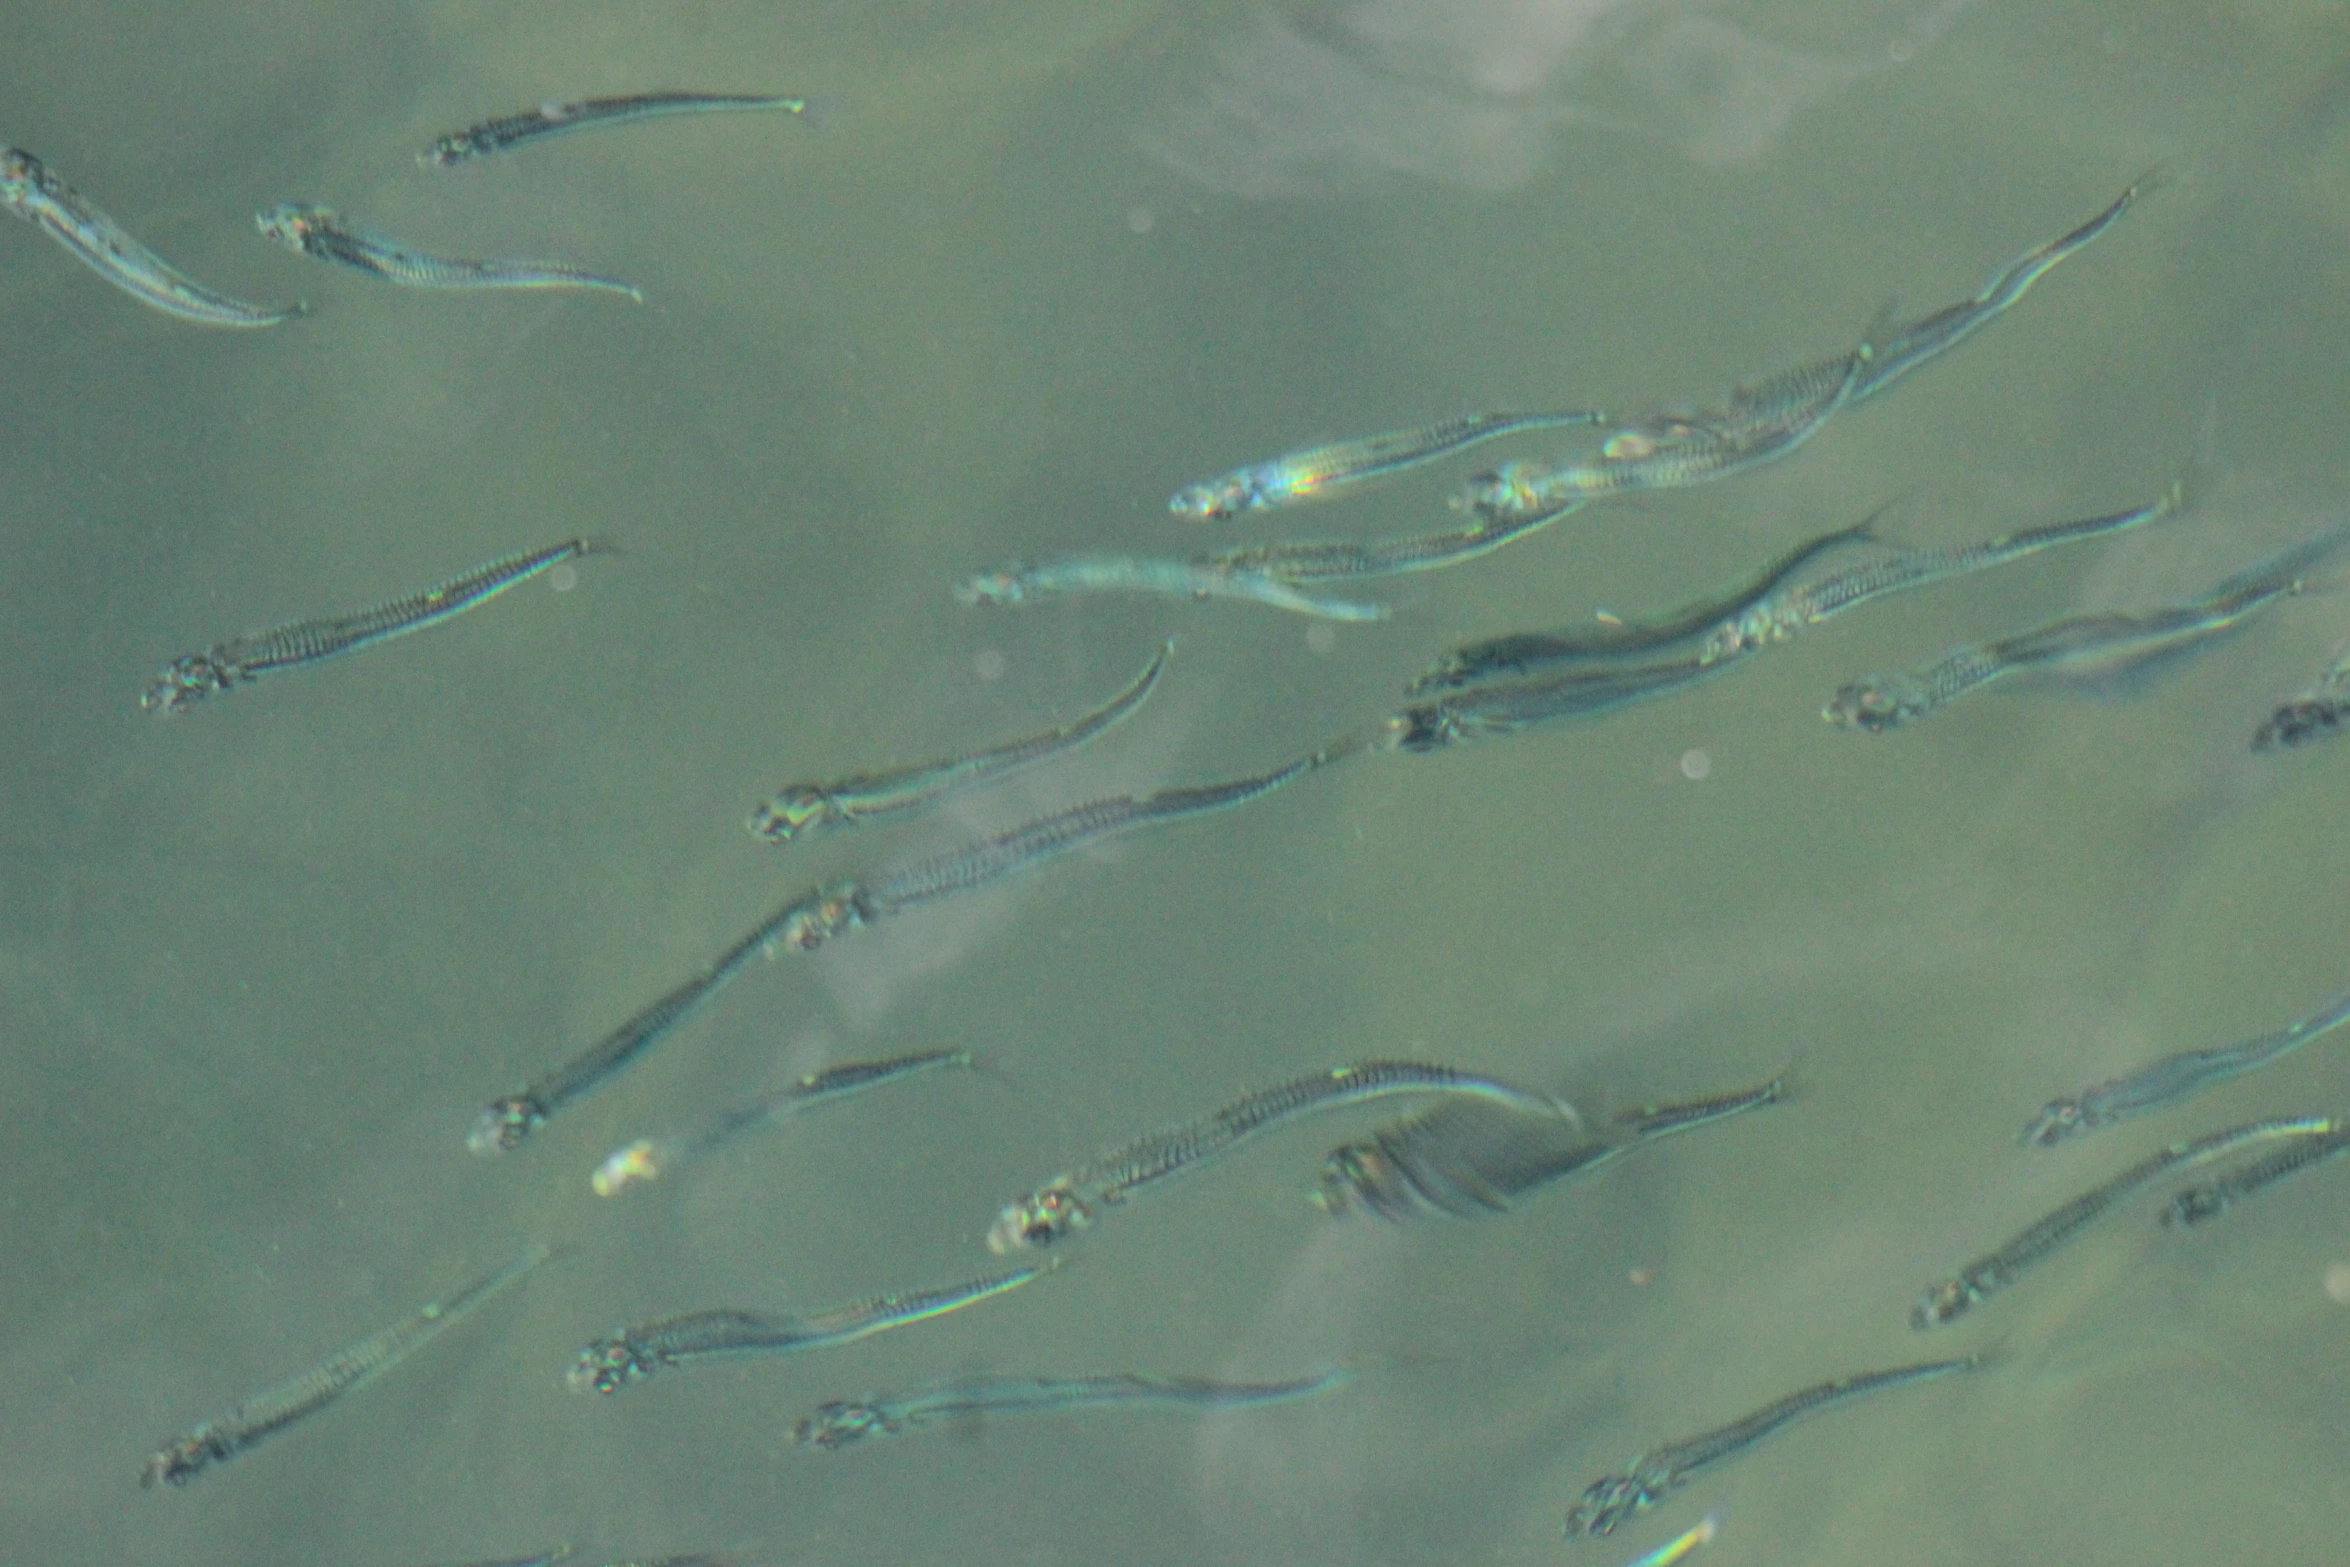 there are many fish swimming and swimming together